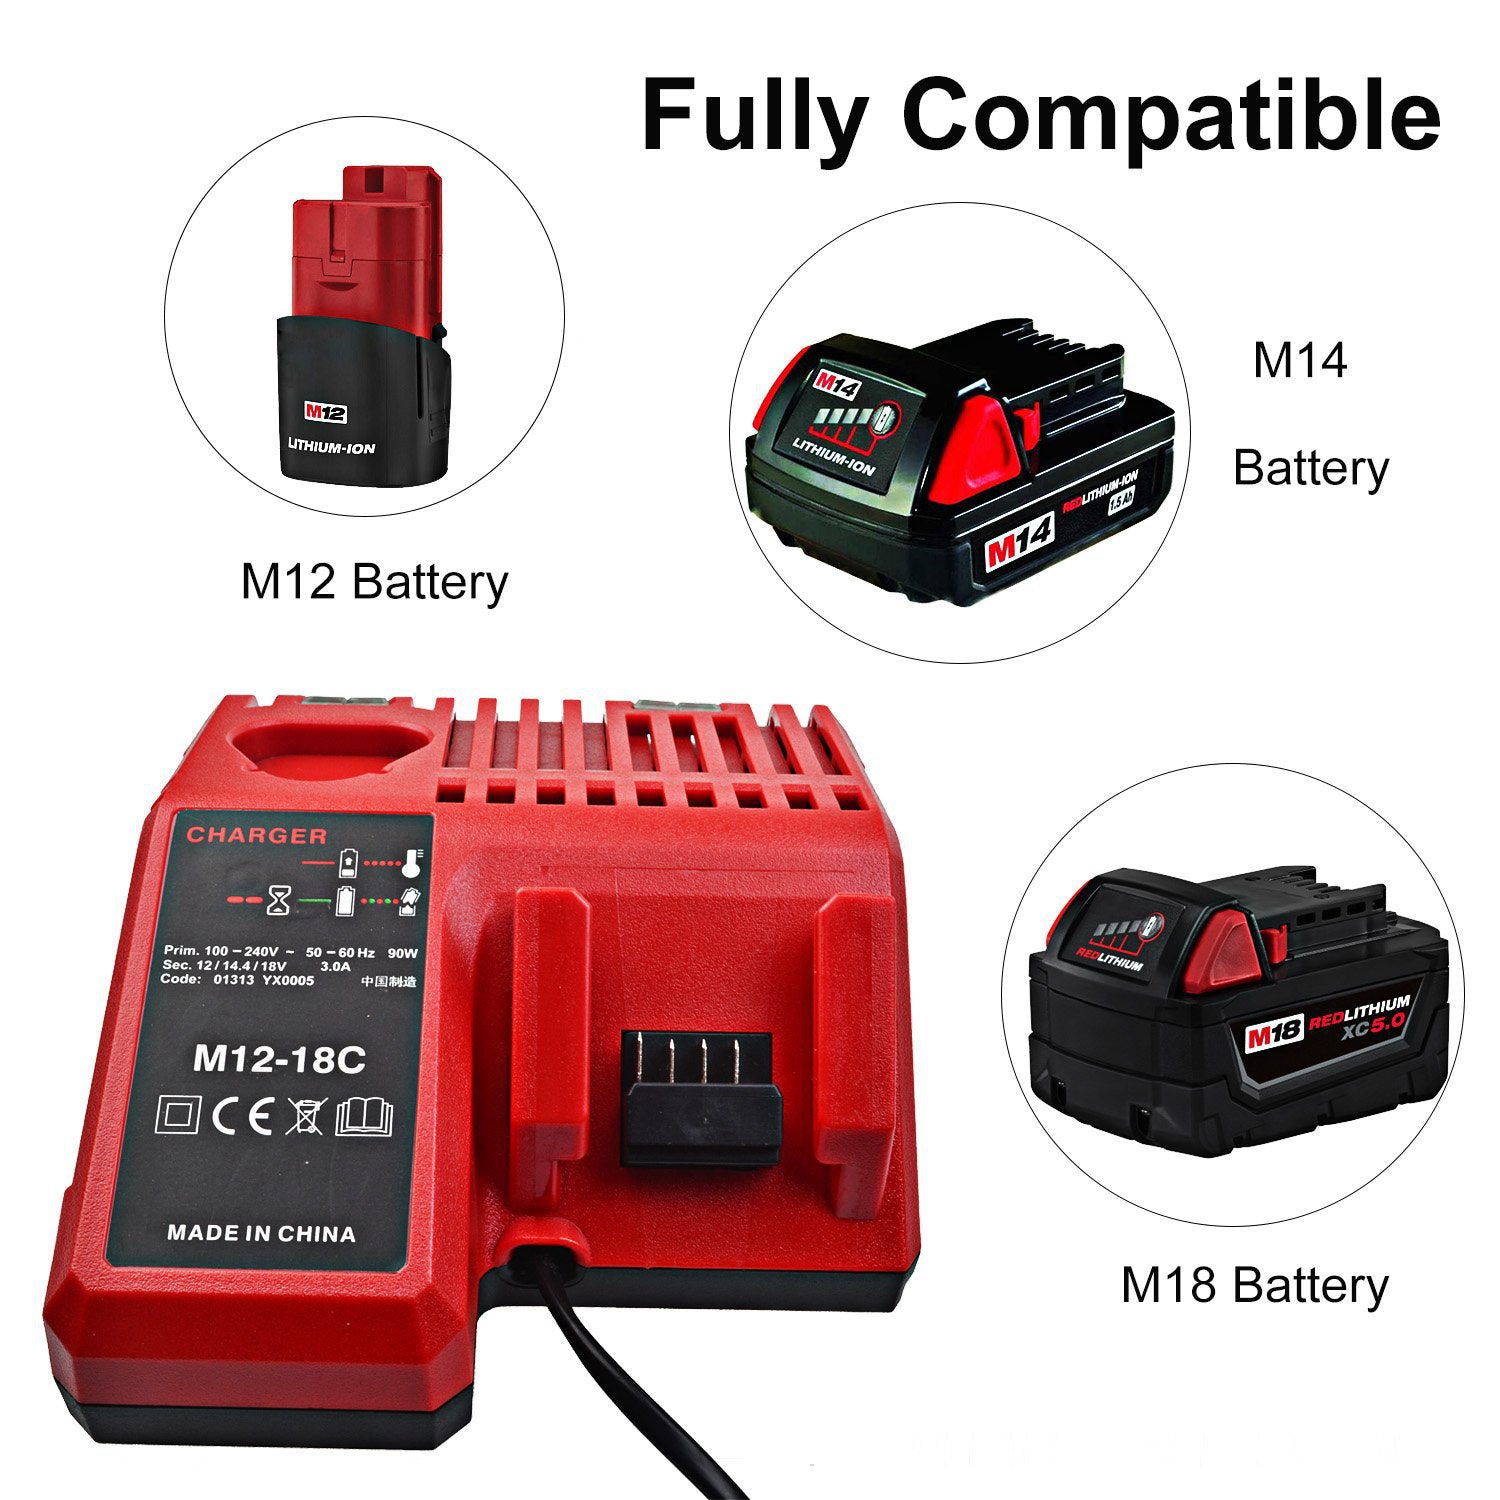 Milwaukee M18 Battery Charger + battery - The Shopsite